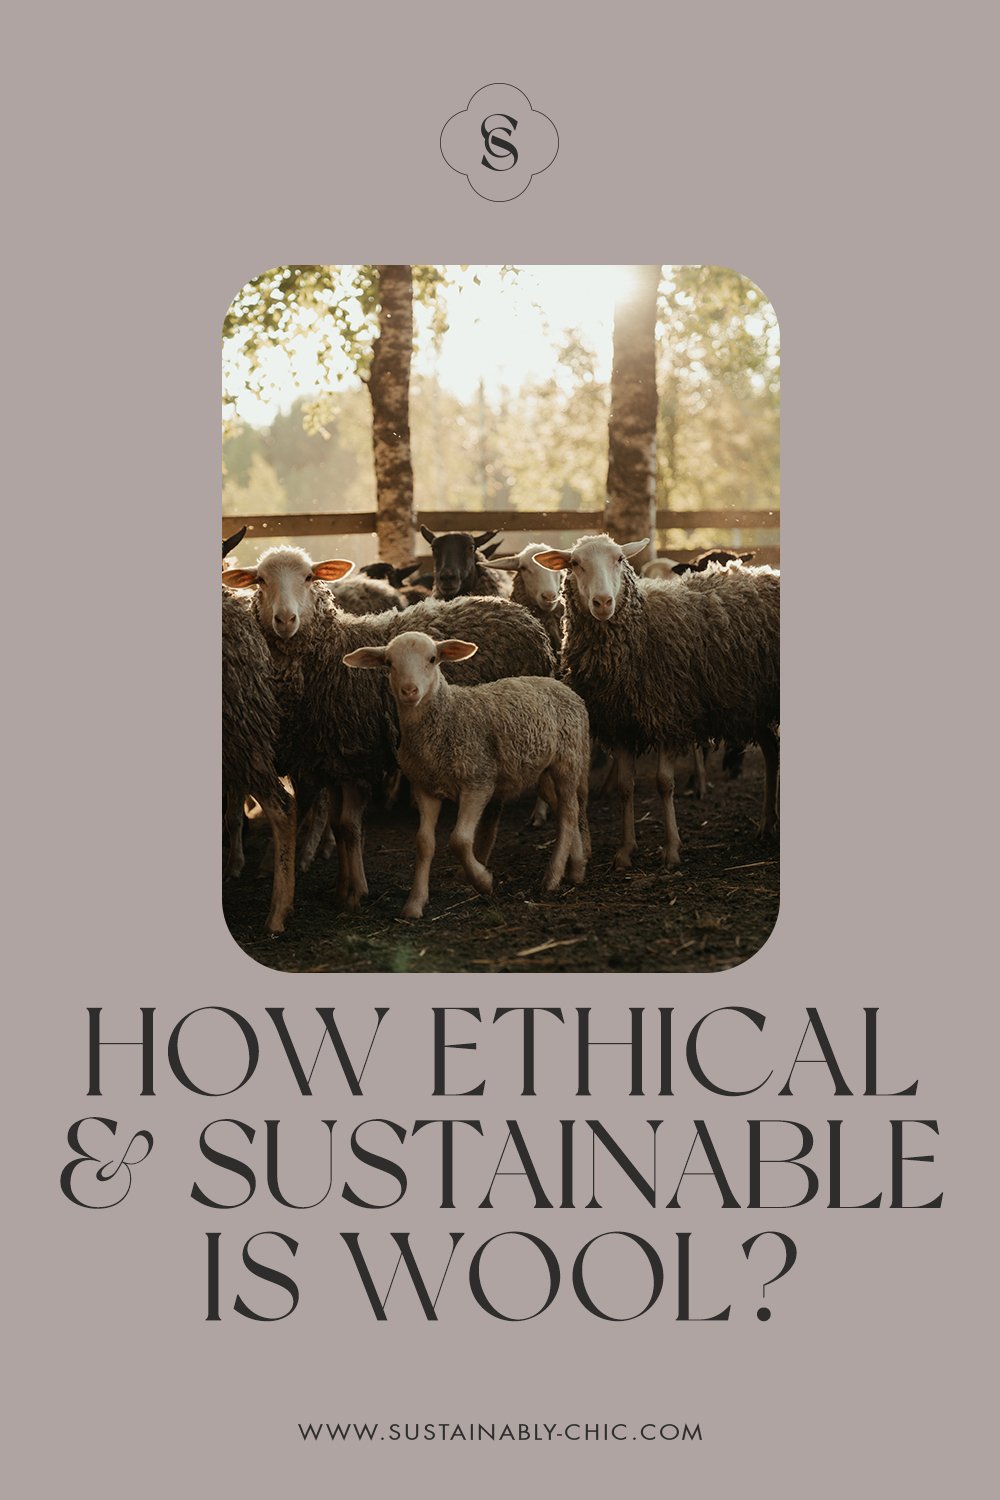 What is Ethical Wool and Does It Really Exist?